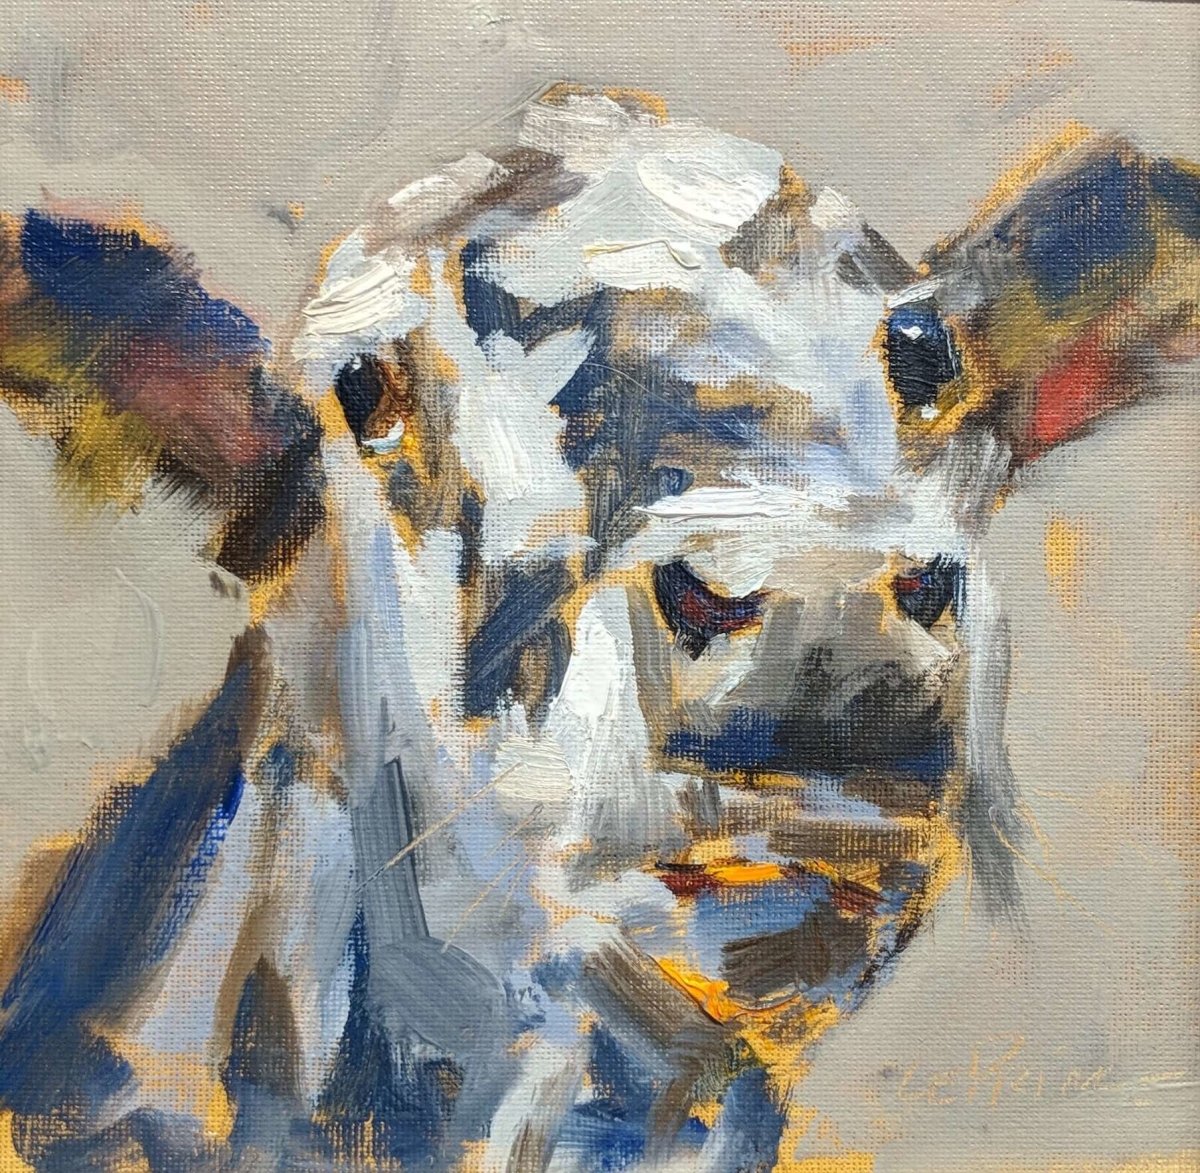 Ally Moo by Kevin LePrince at LePrince Galleries